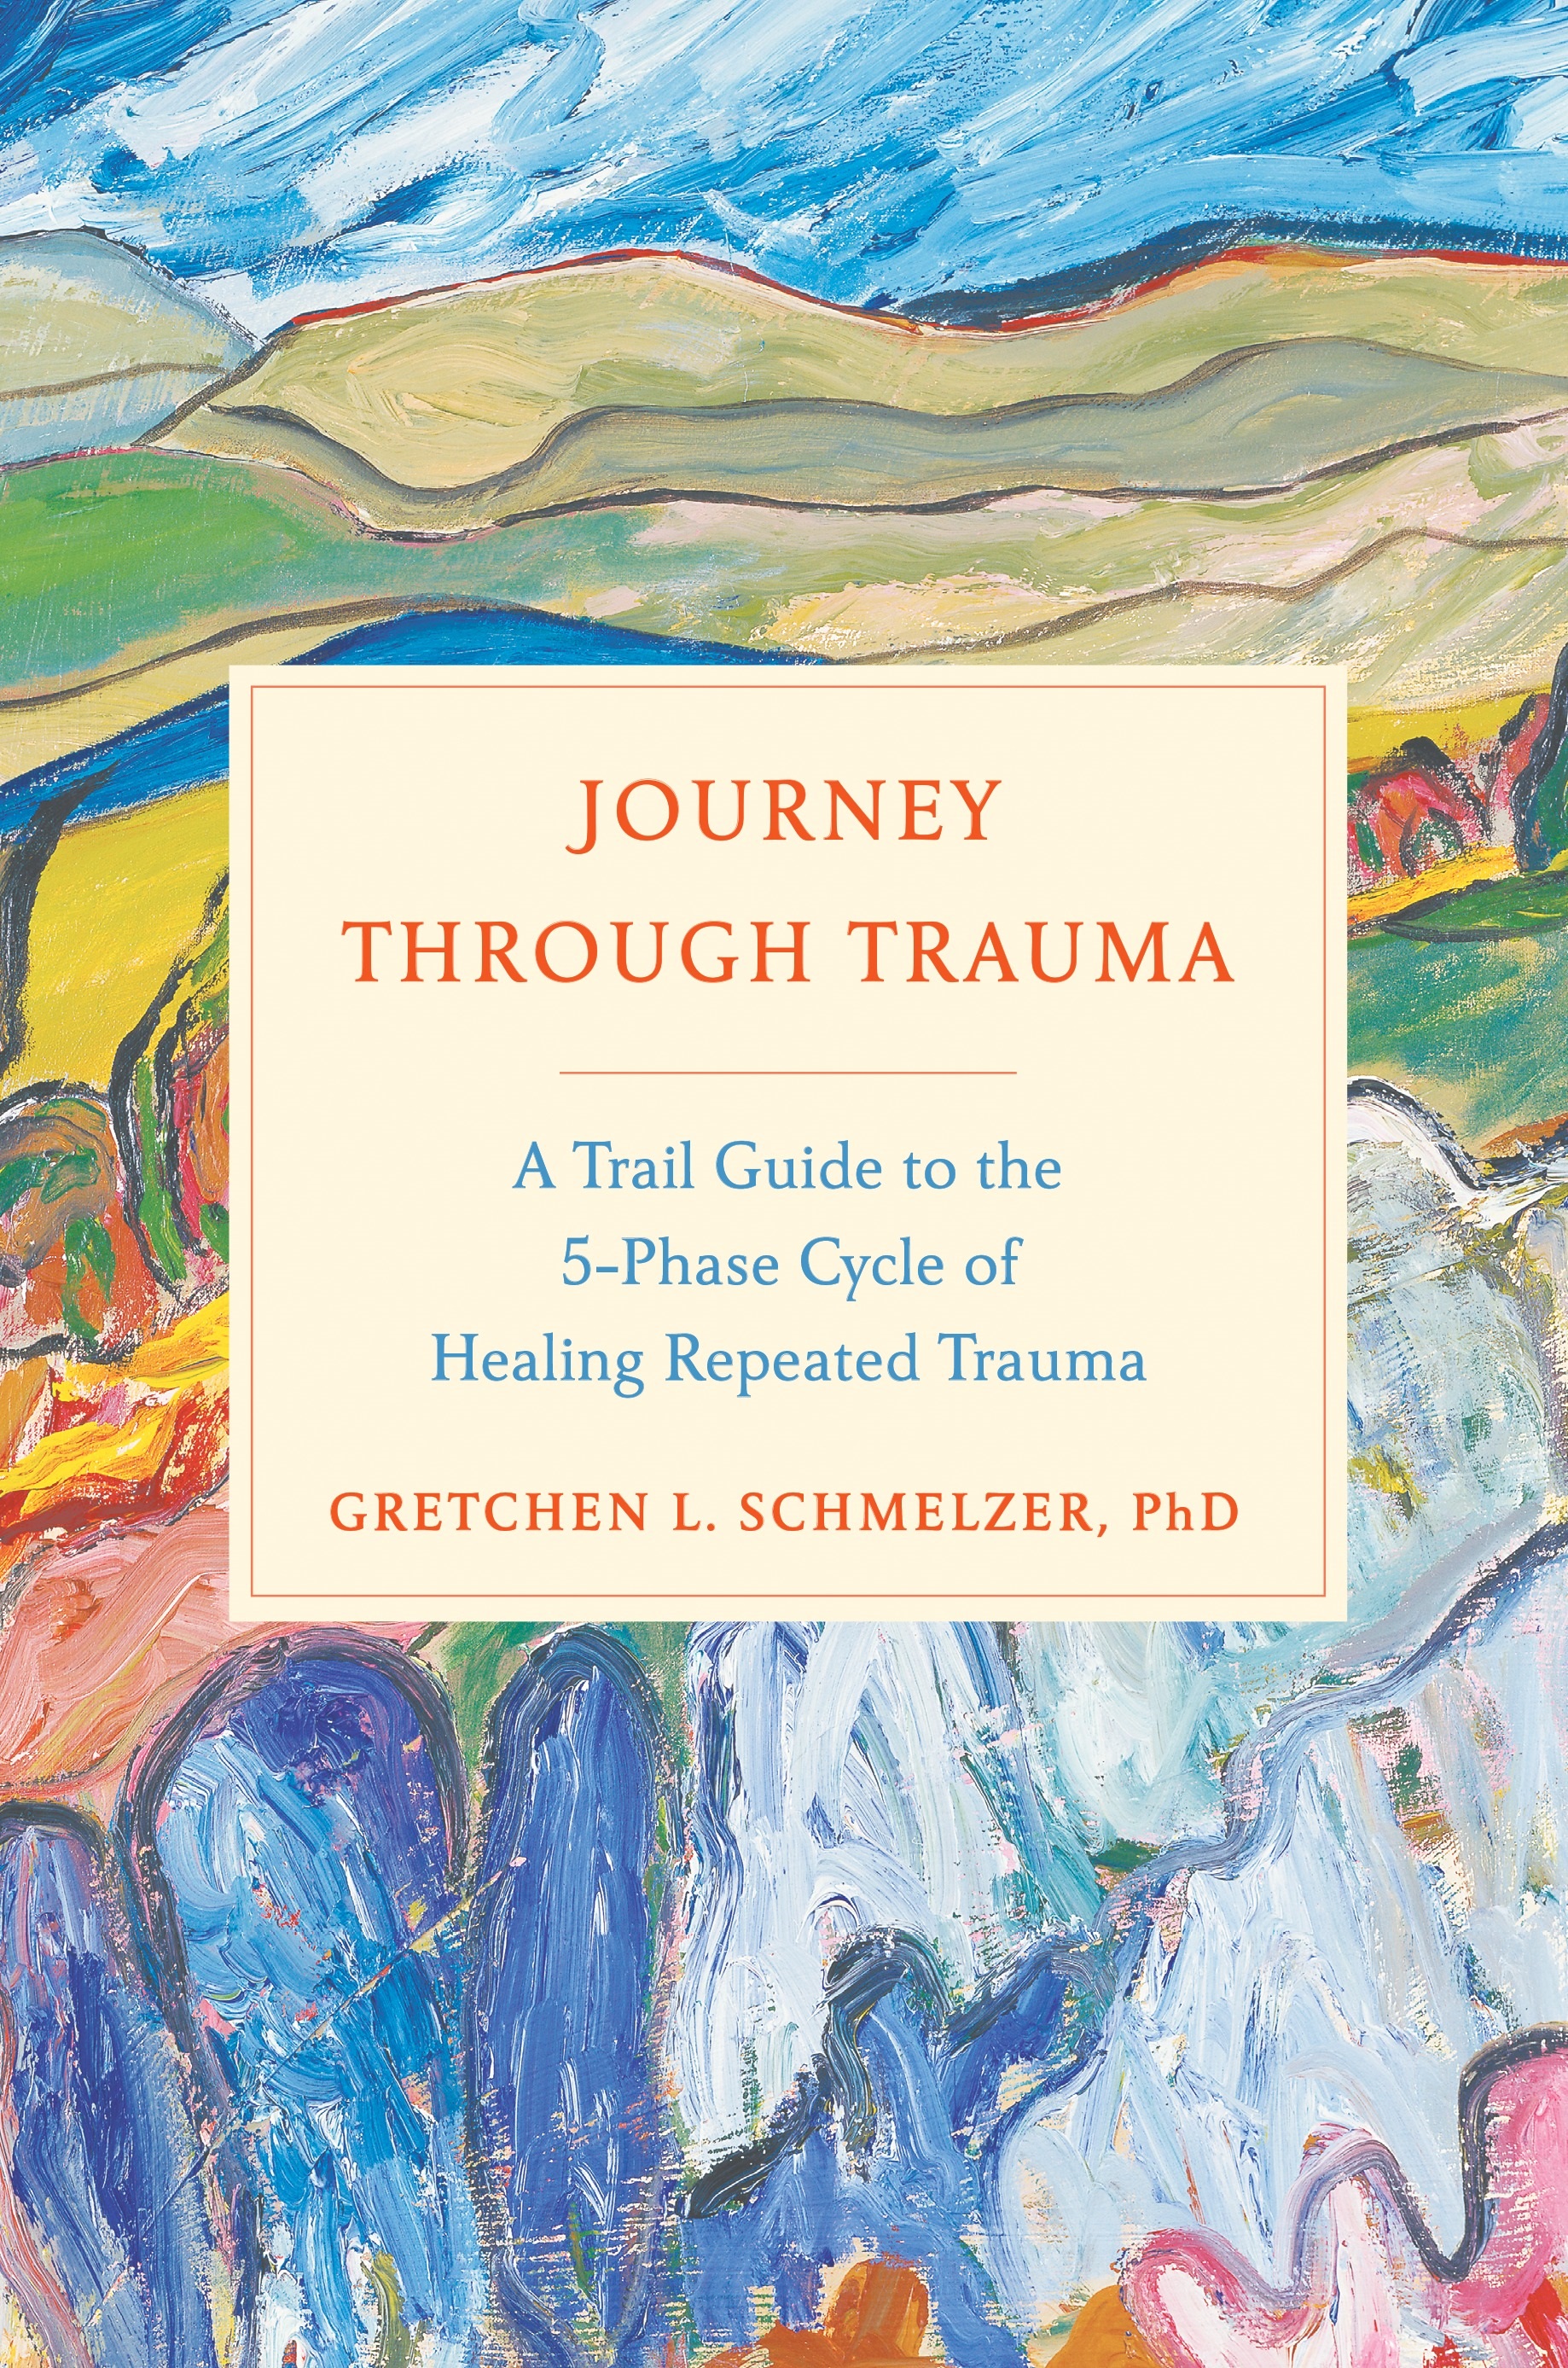 Book Launch: Journey Through Trauma: A Trail Guide to the 5-Phase Cycle of Healing Repeated Trauma by Gretchen L. Schmelzer, PhD — in conversation w/ Tracie Gardner